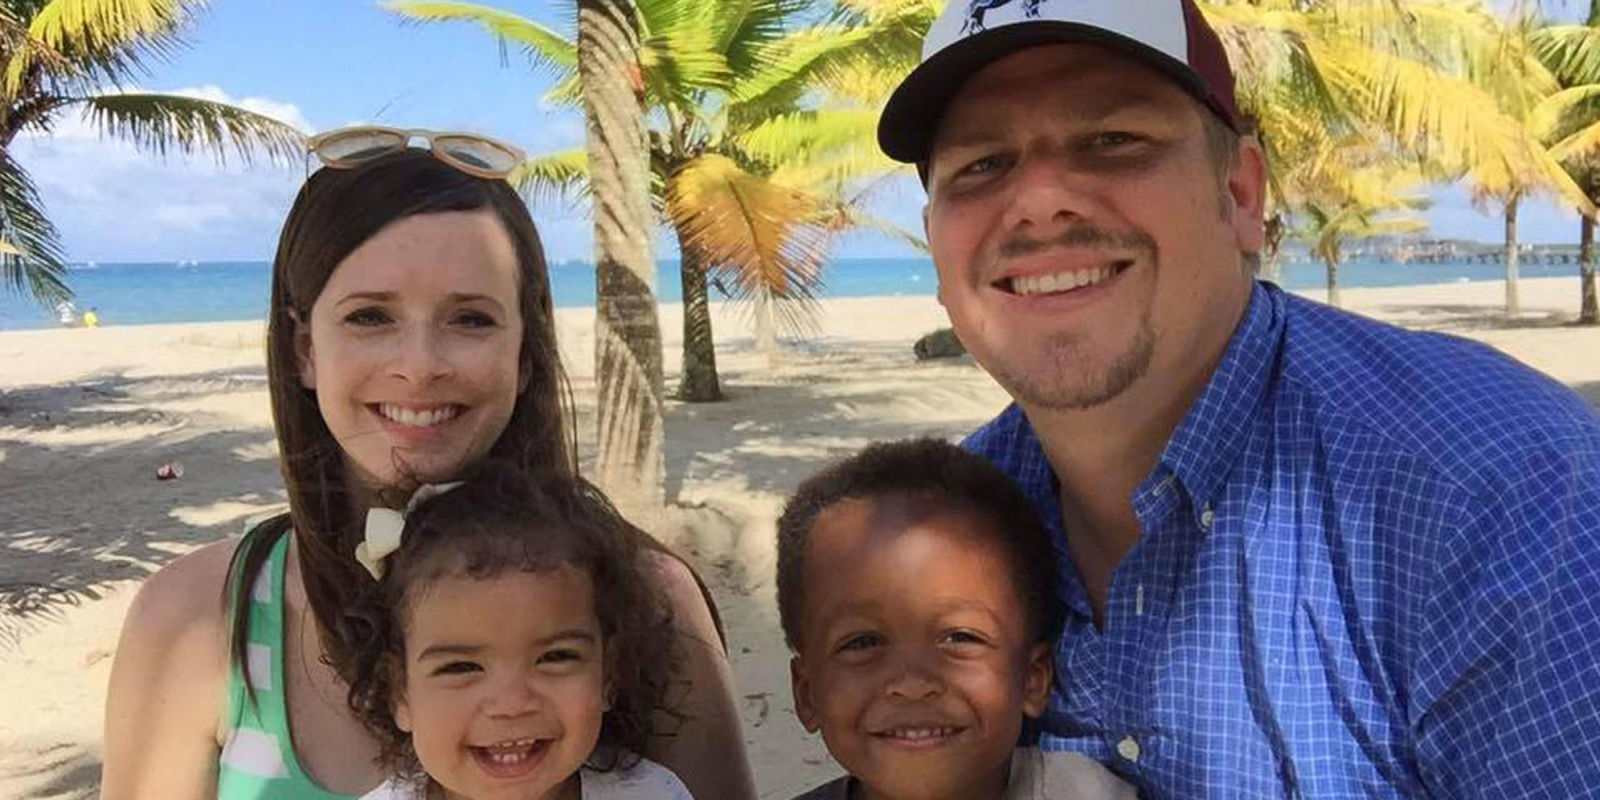 Why my wife and I- both white evangelicals - gave birth to black triplets